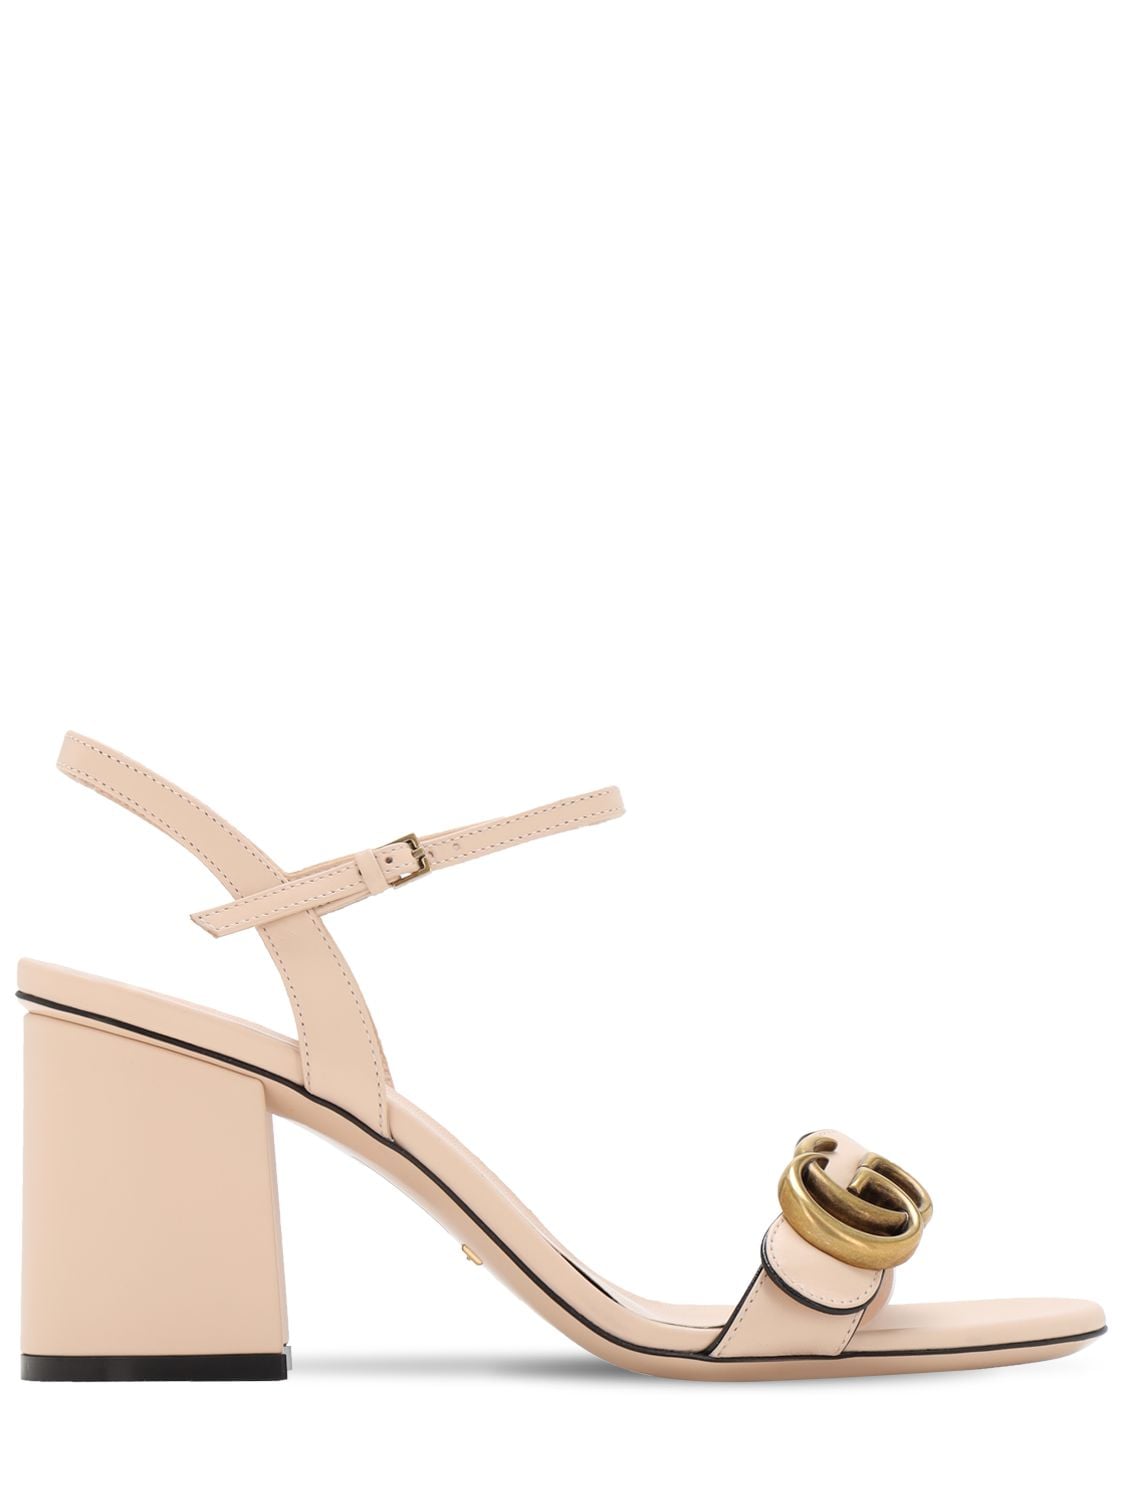 Gucci 75mm Marmont Leather Sandals In Nude